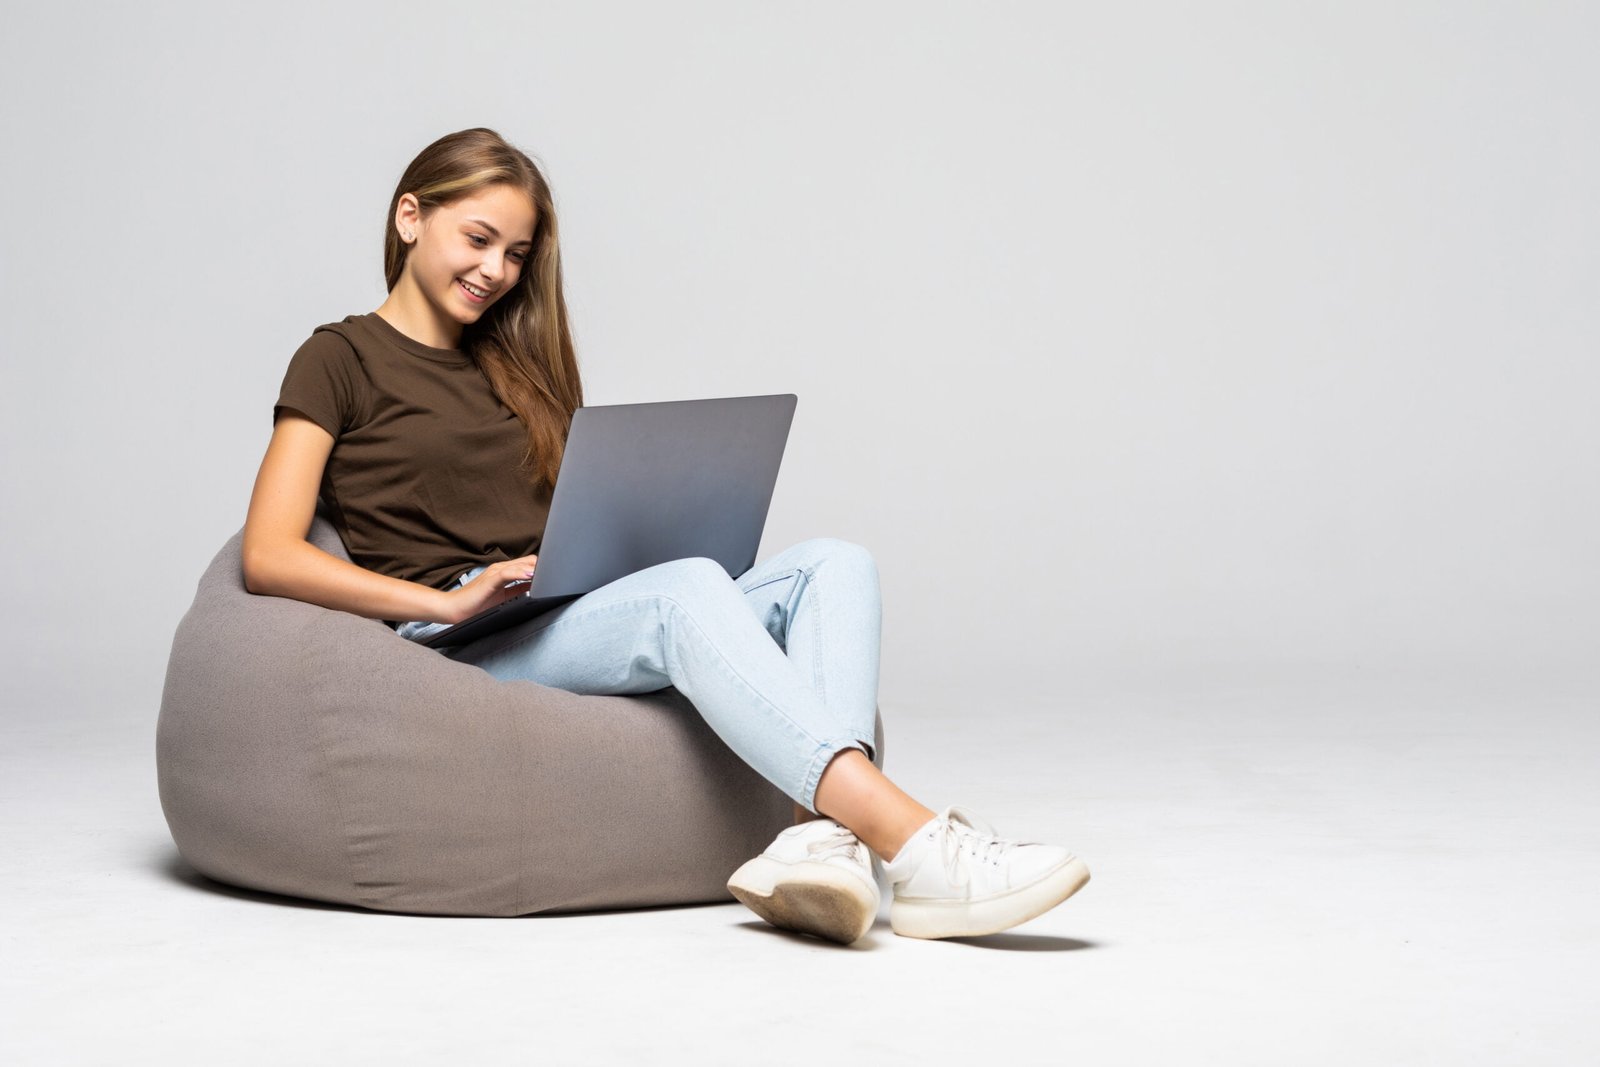 Happy woman sitting on the floor using laptop on gray background